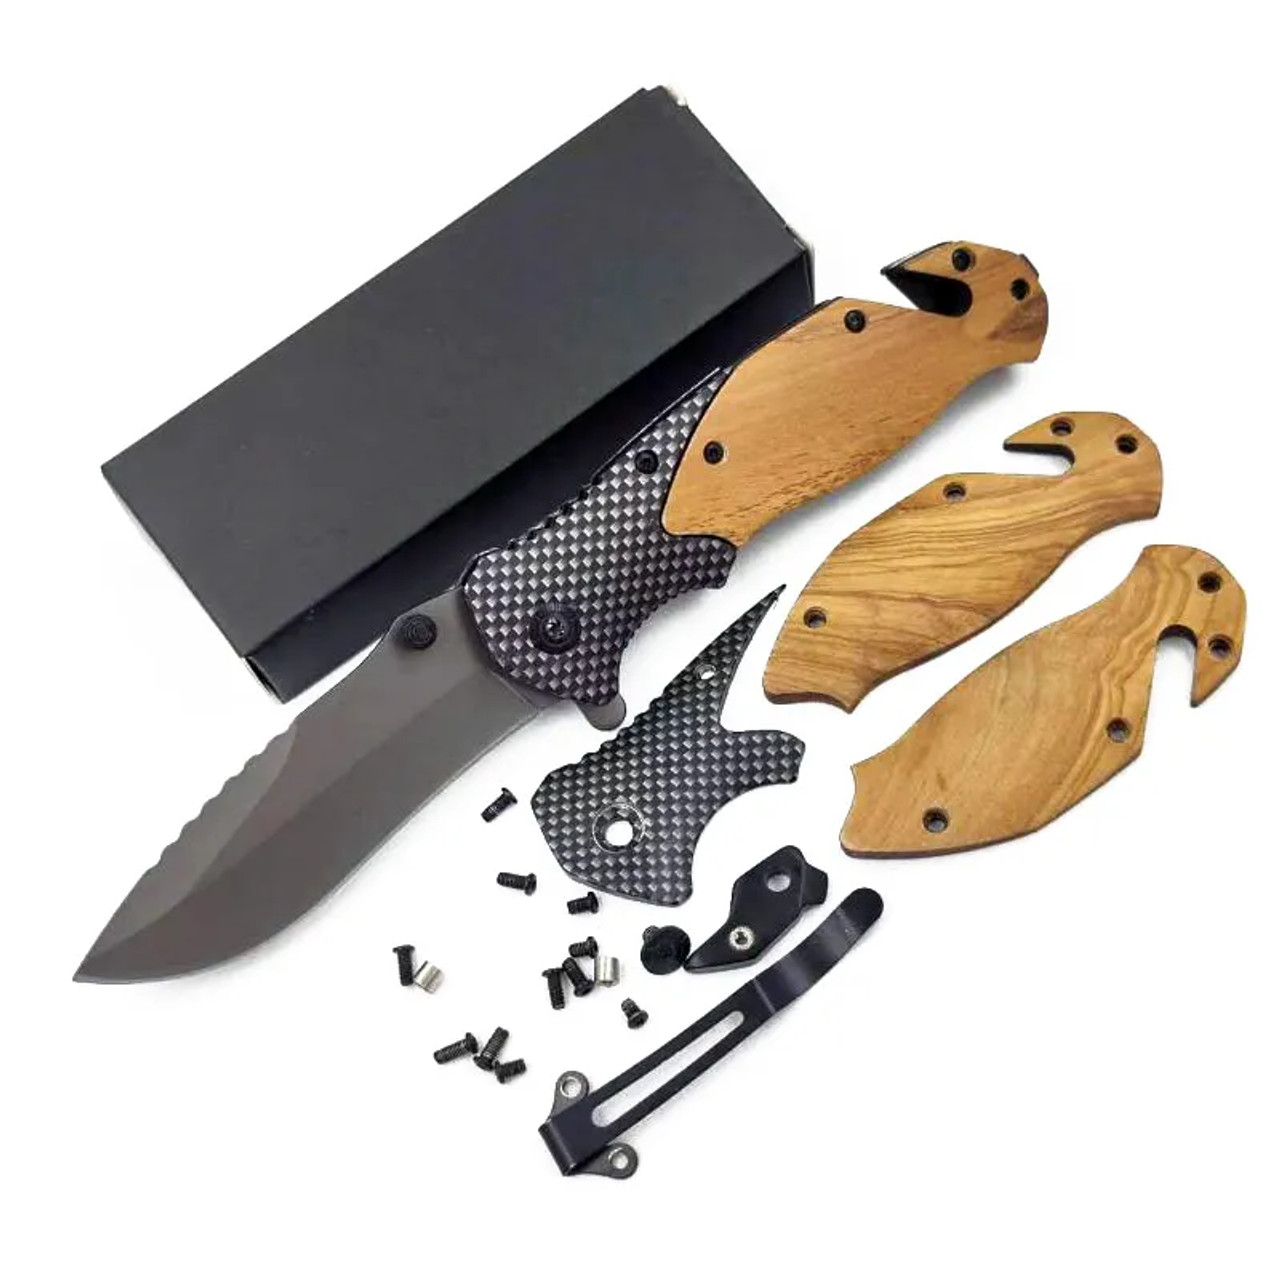 Knife with box, individually packaged, parts breakout